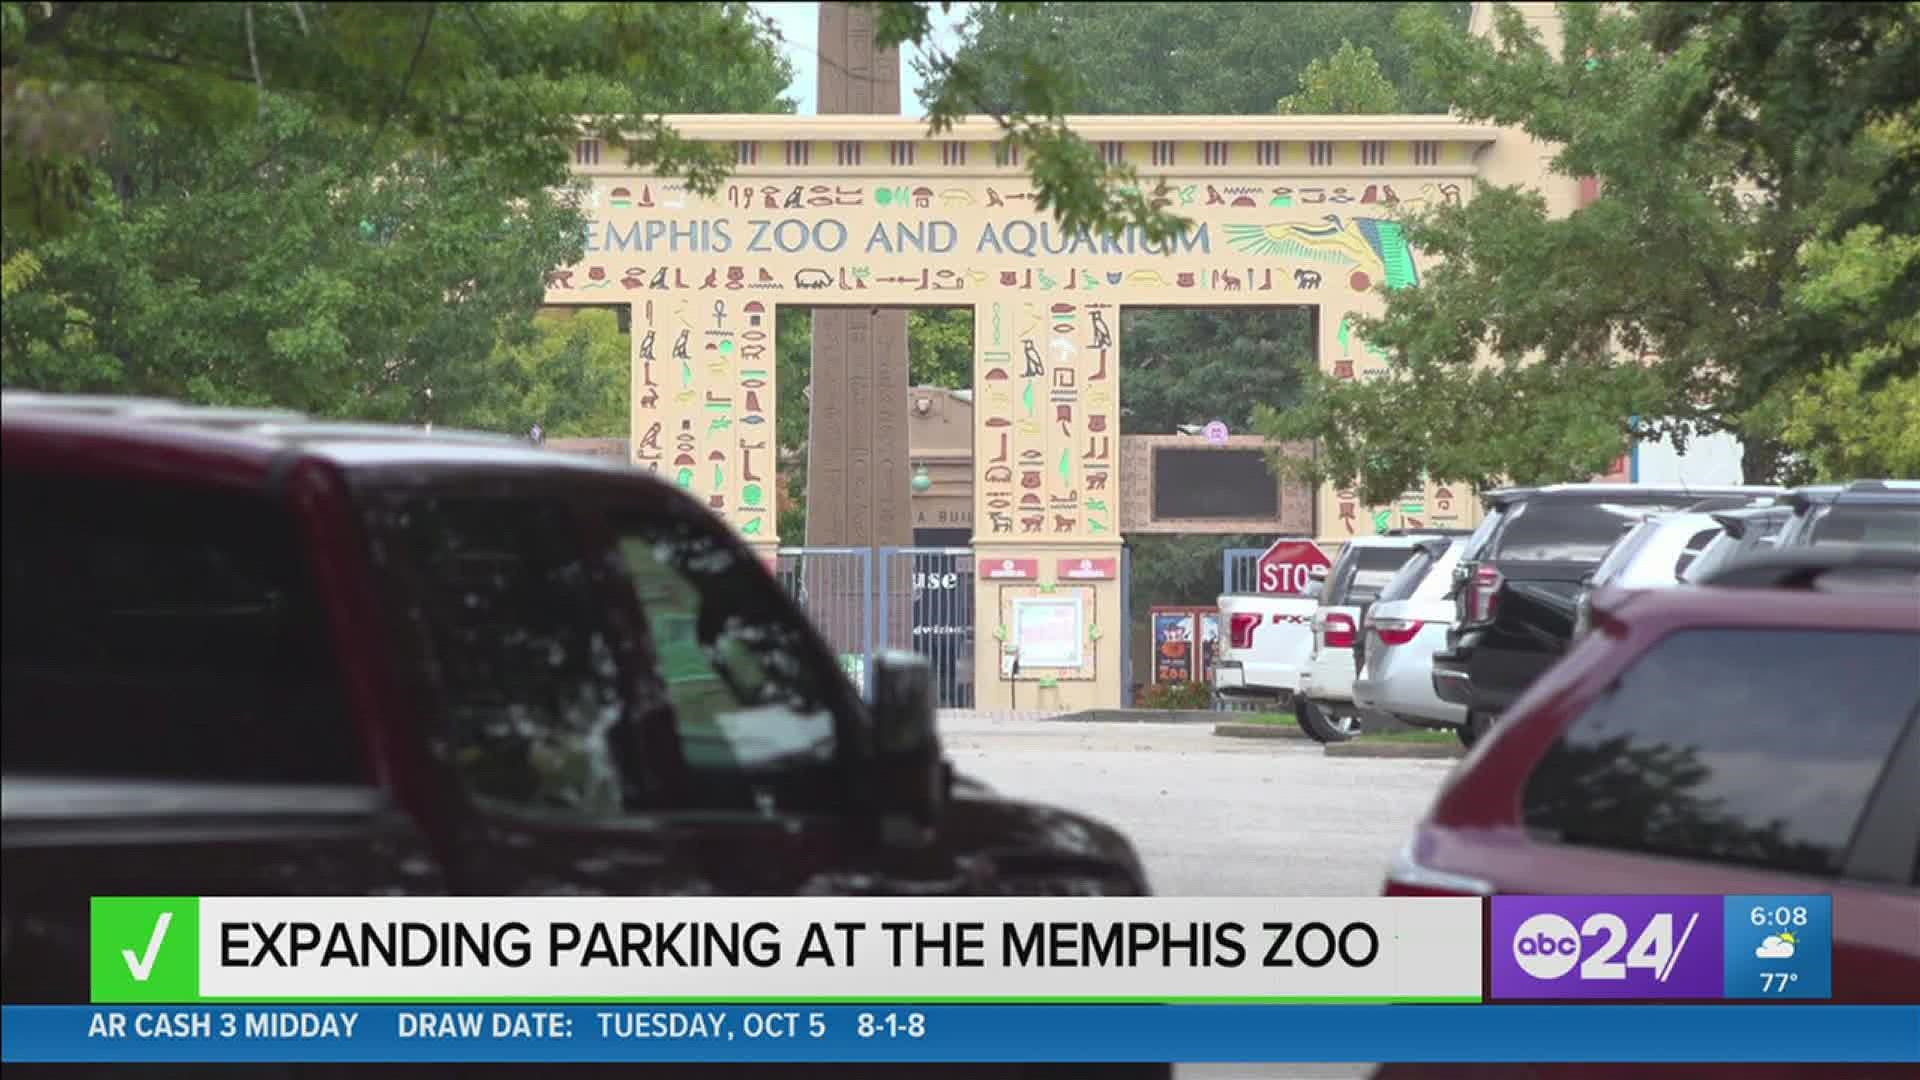 "There is literally nothing new about it. It is the exact same compromise plan," said Matt Thompson, Memphis Zoo Deputy Director.